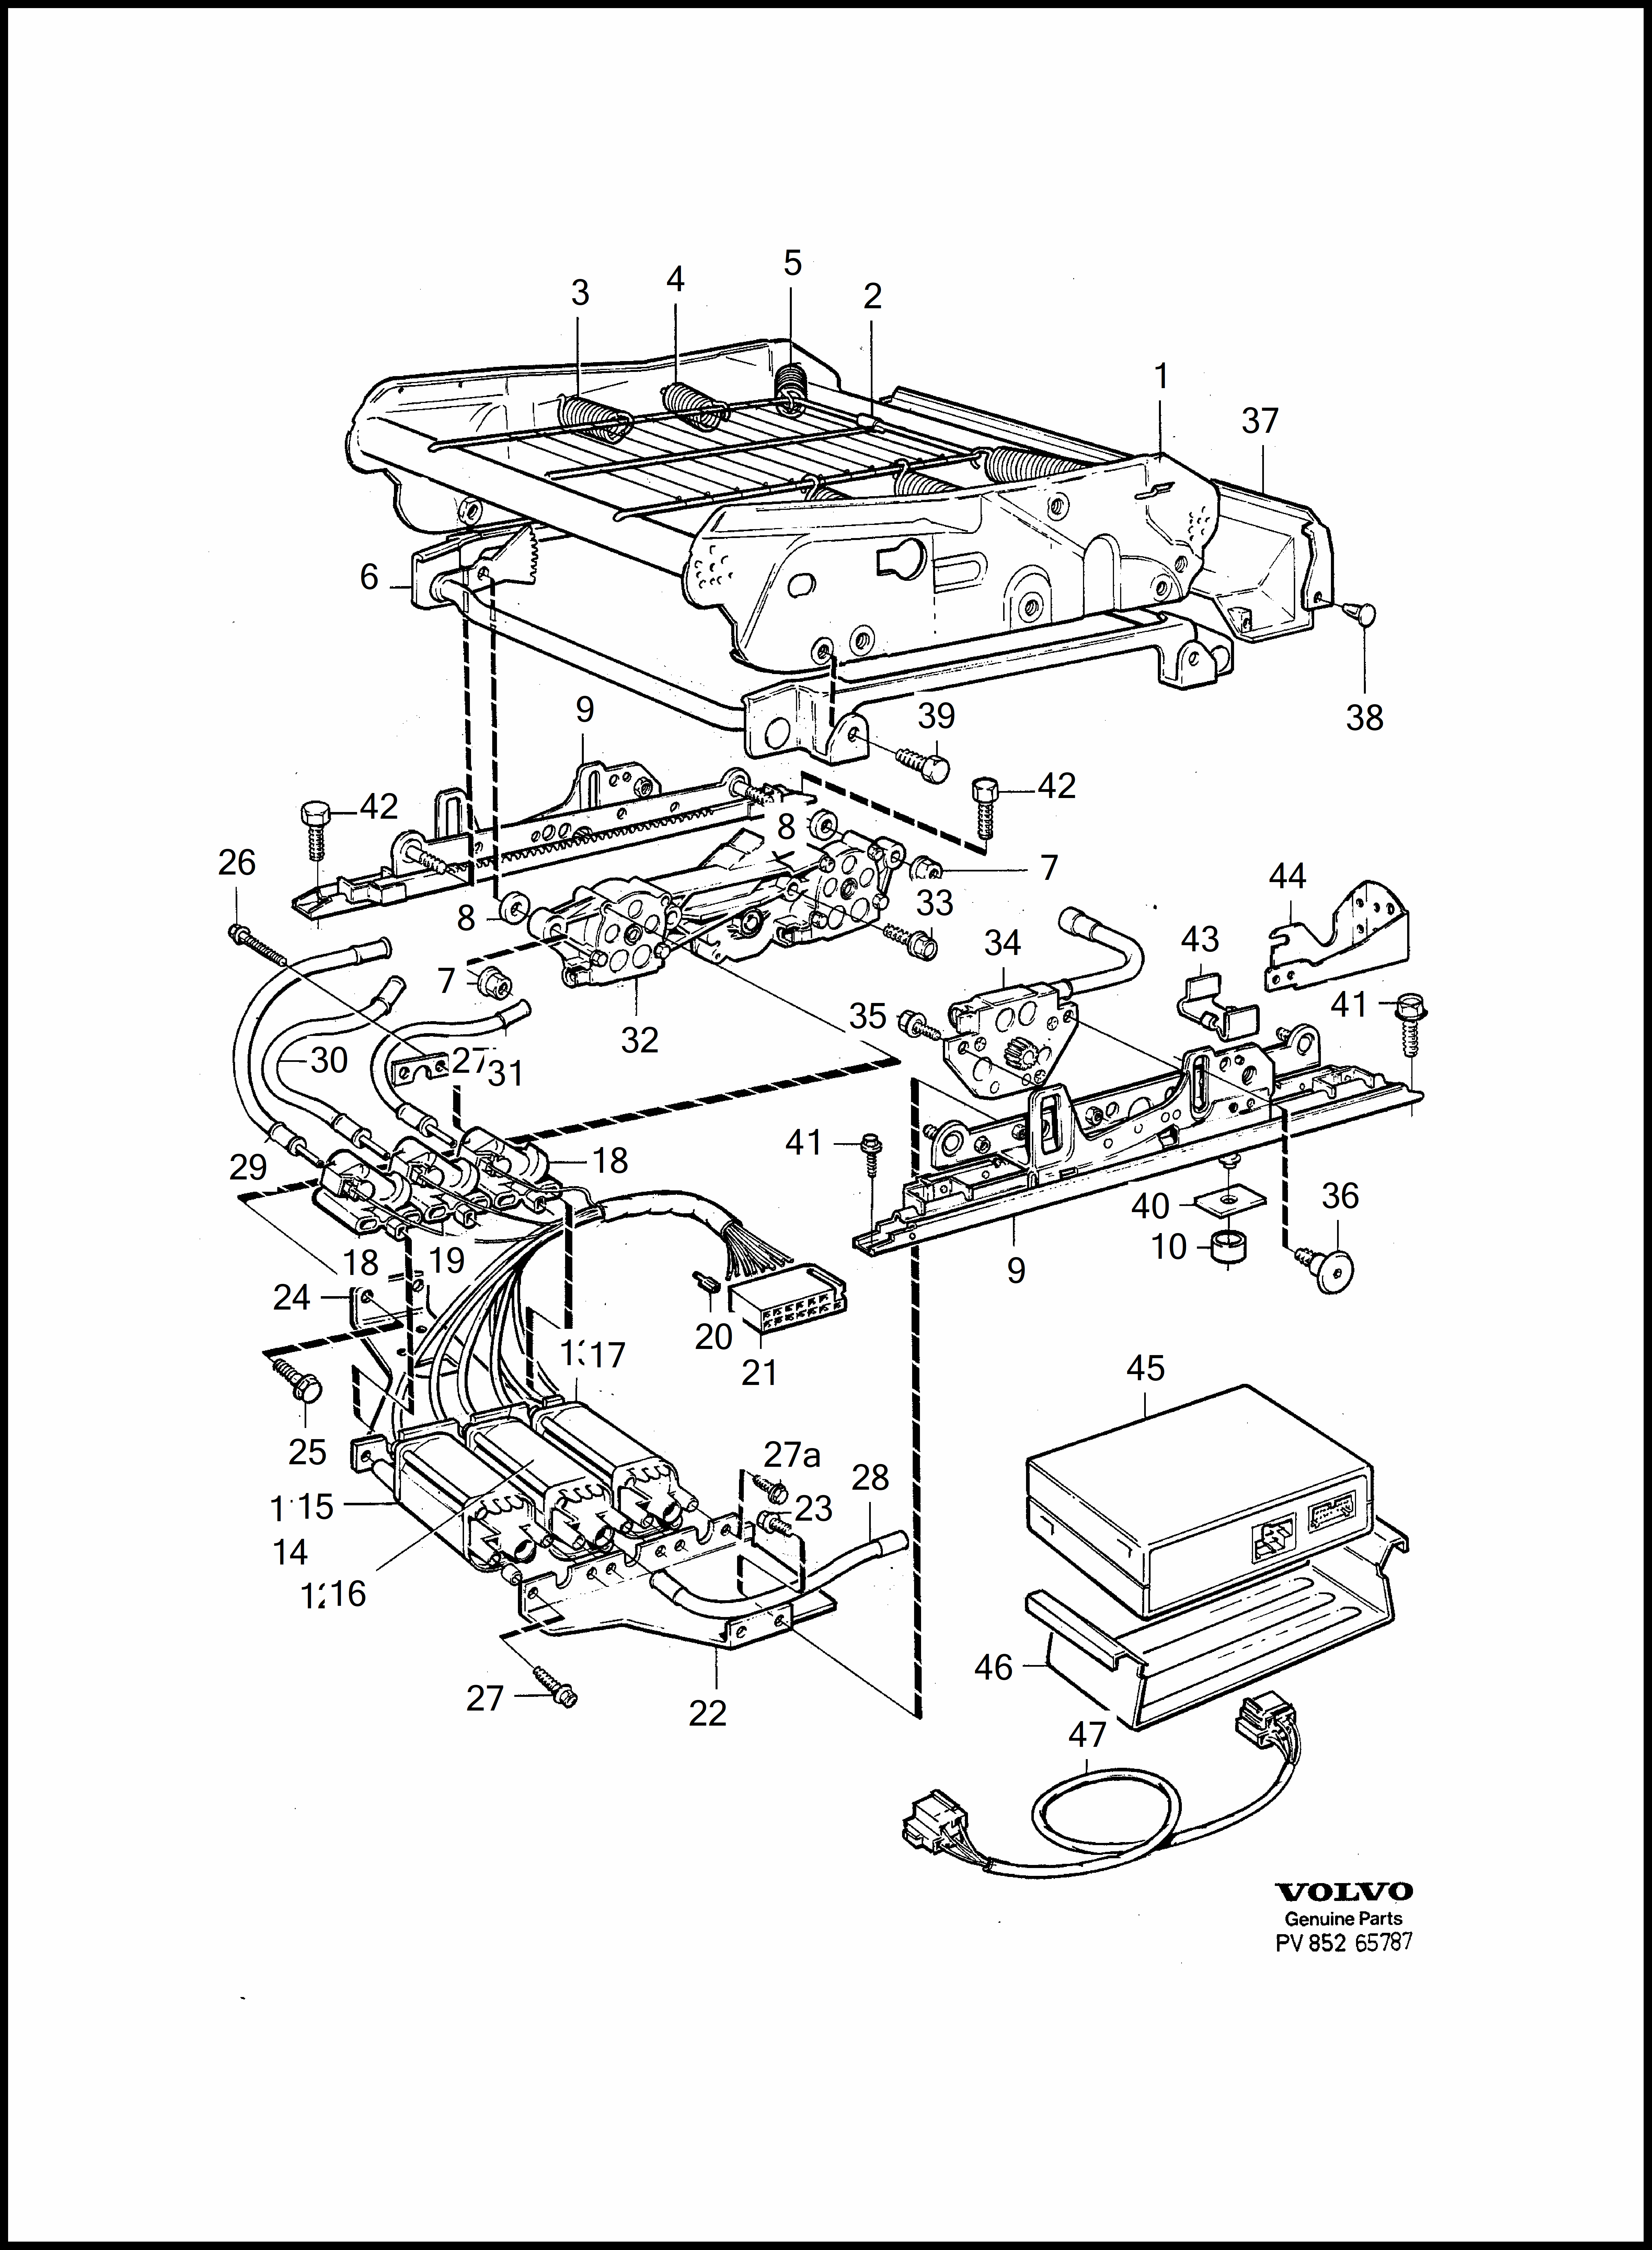 subframe for seat, electrical adjustment pre Volvo 960 960